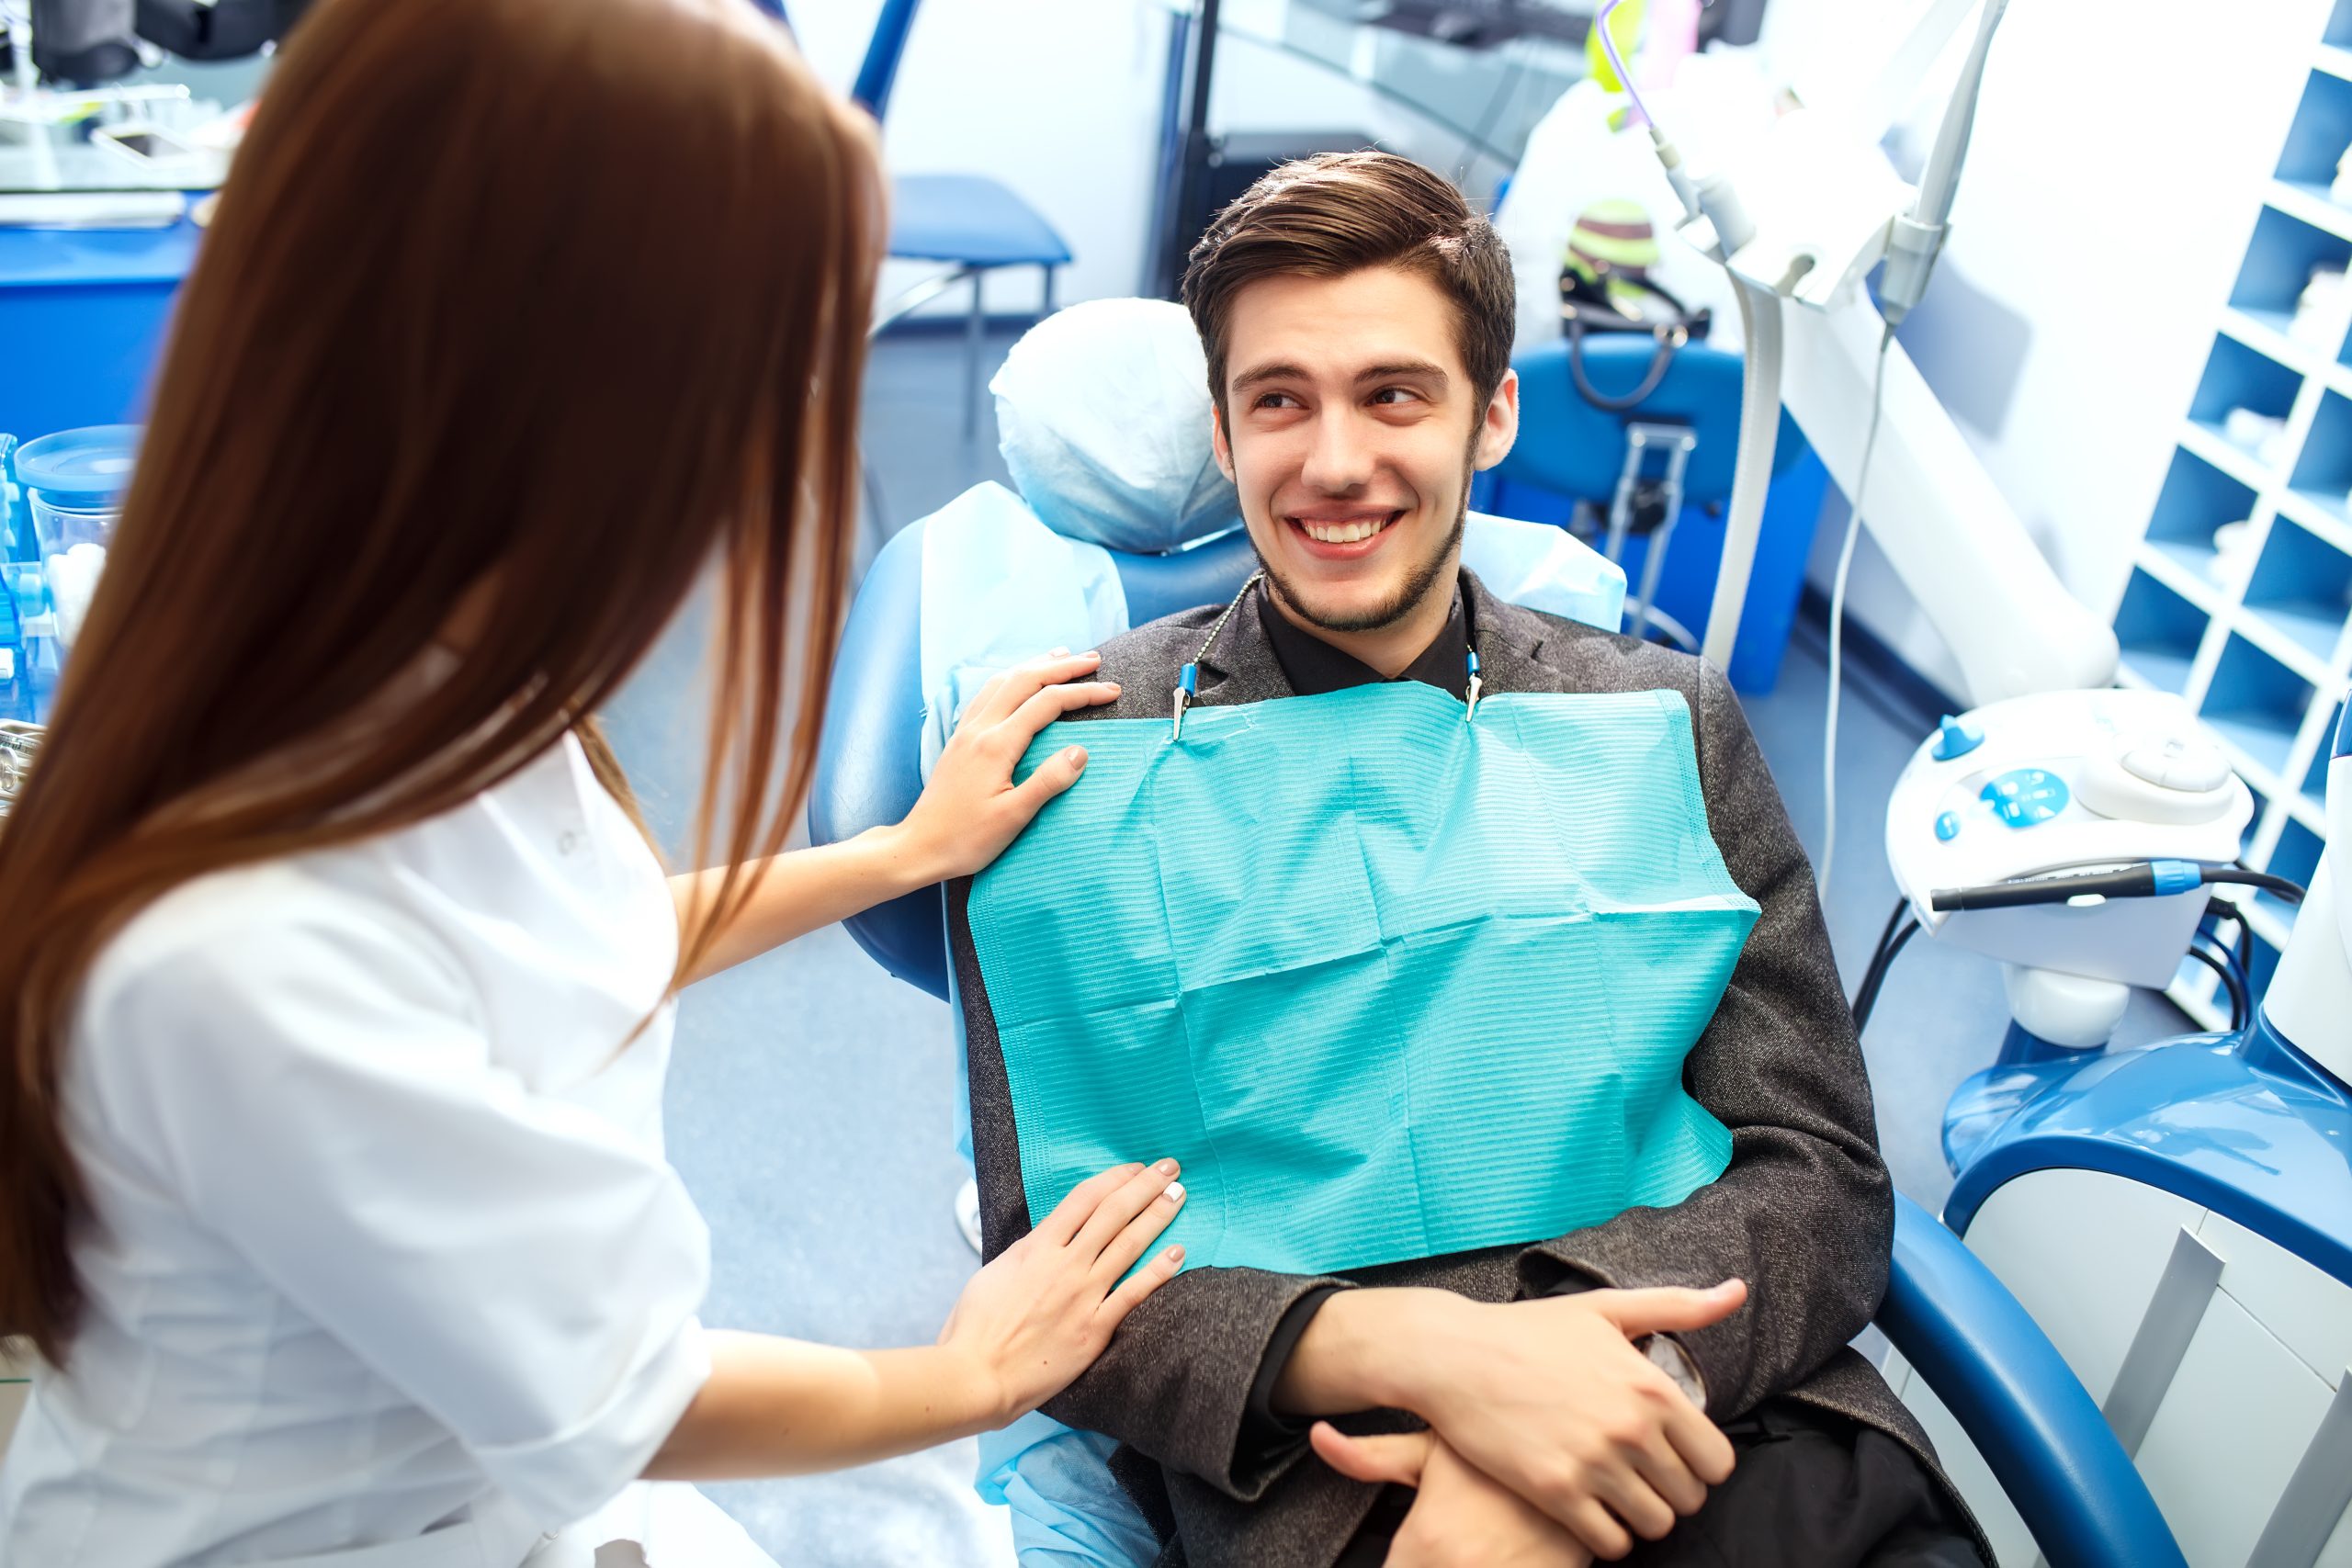 Root Canal Treatment: What to Expect and How to Prepare